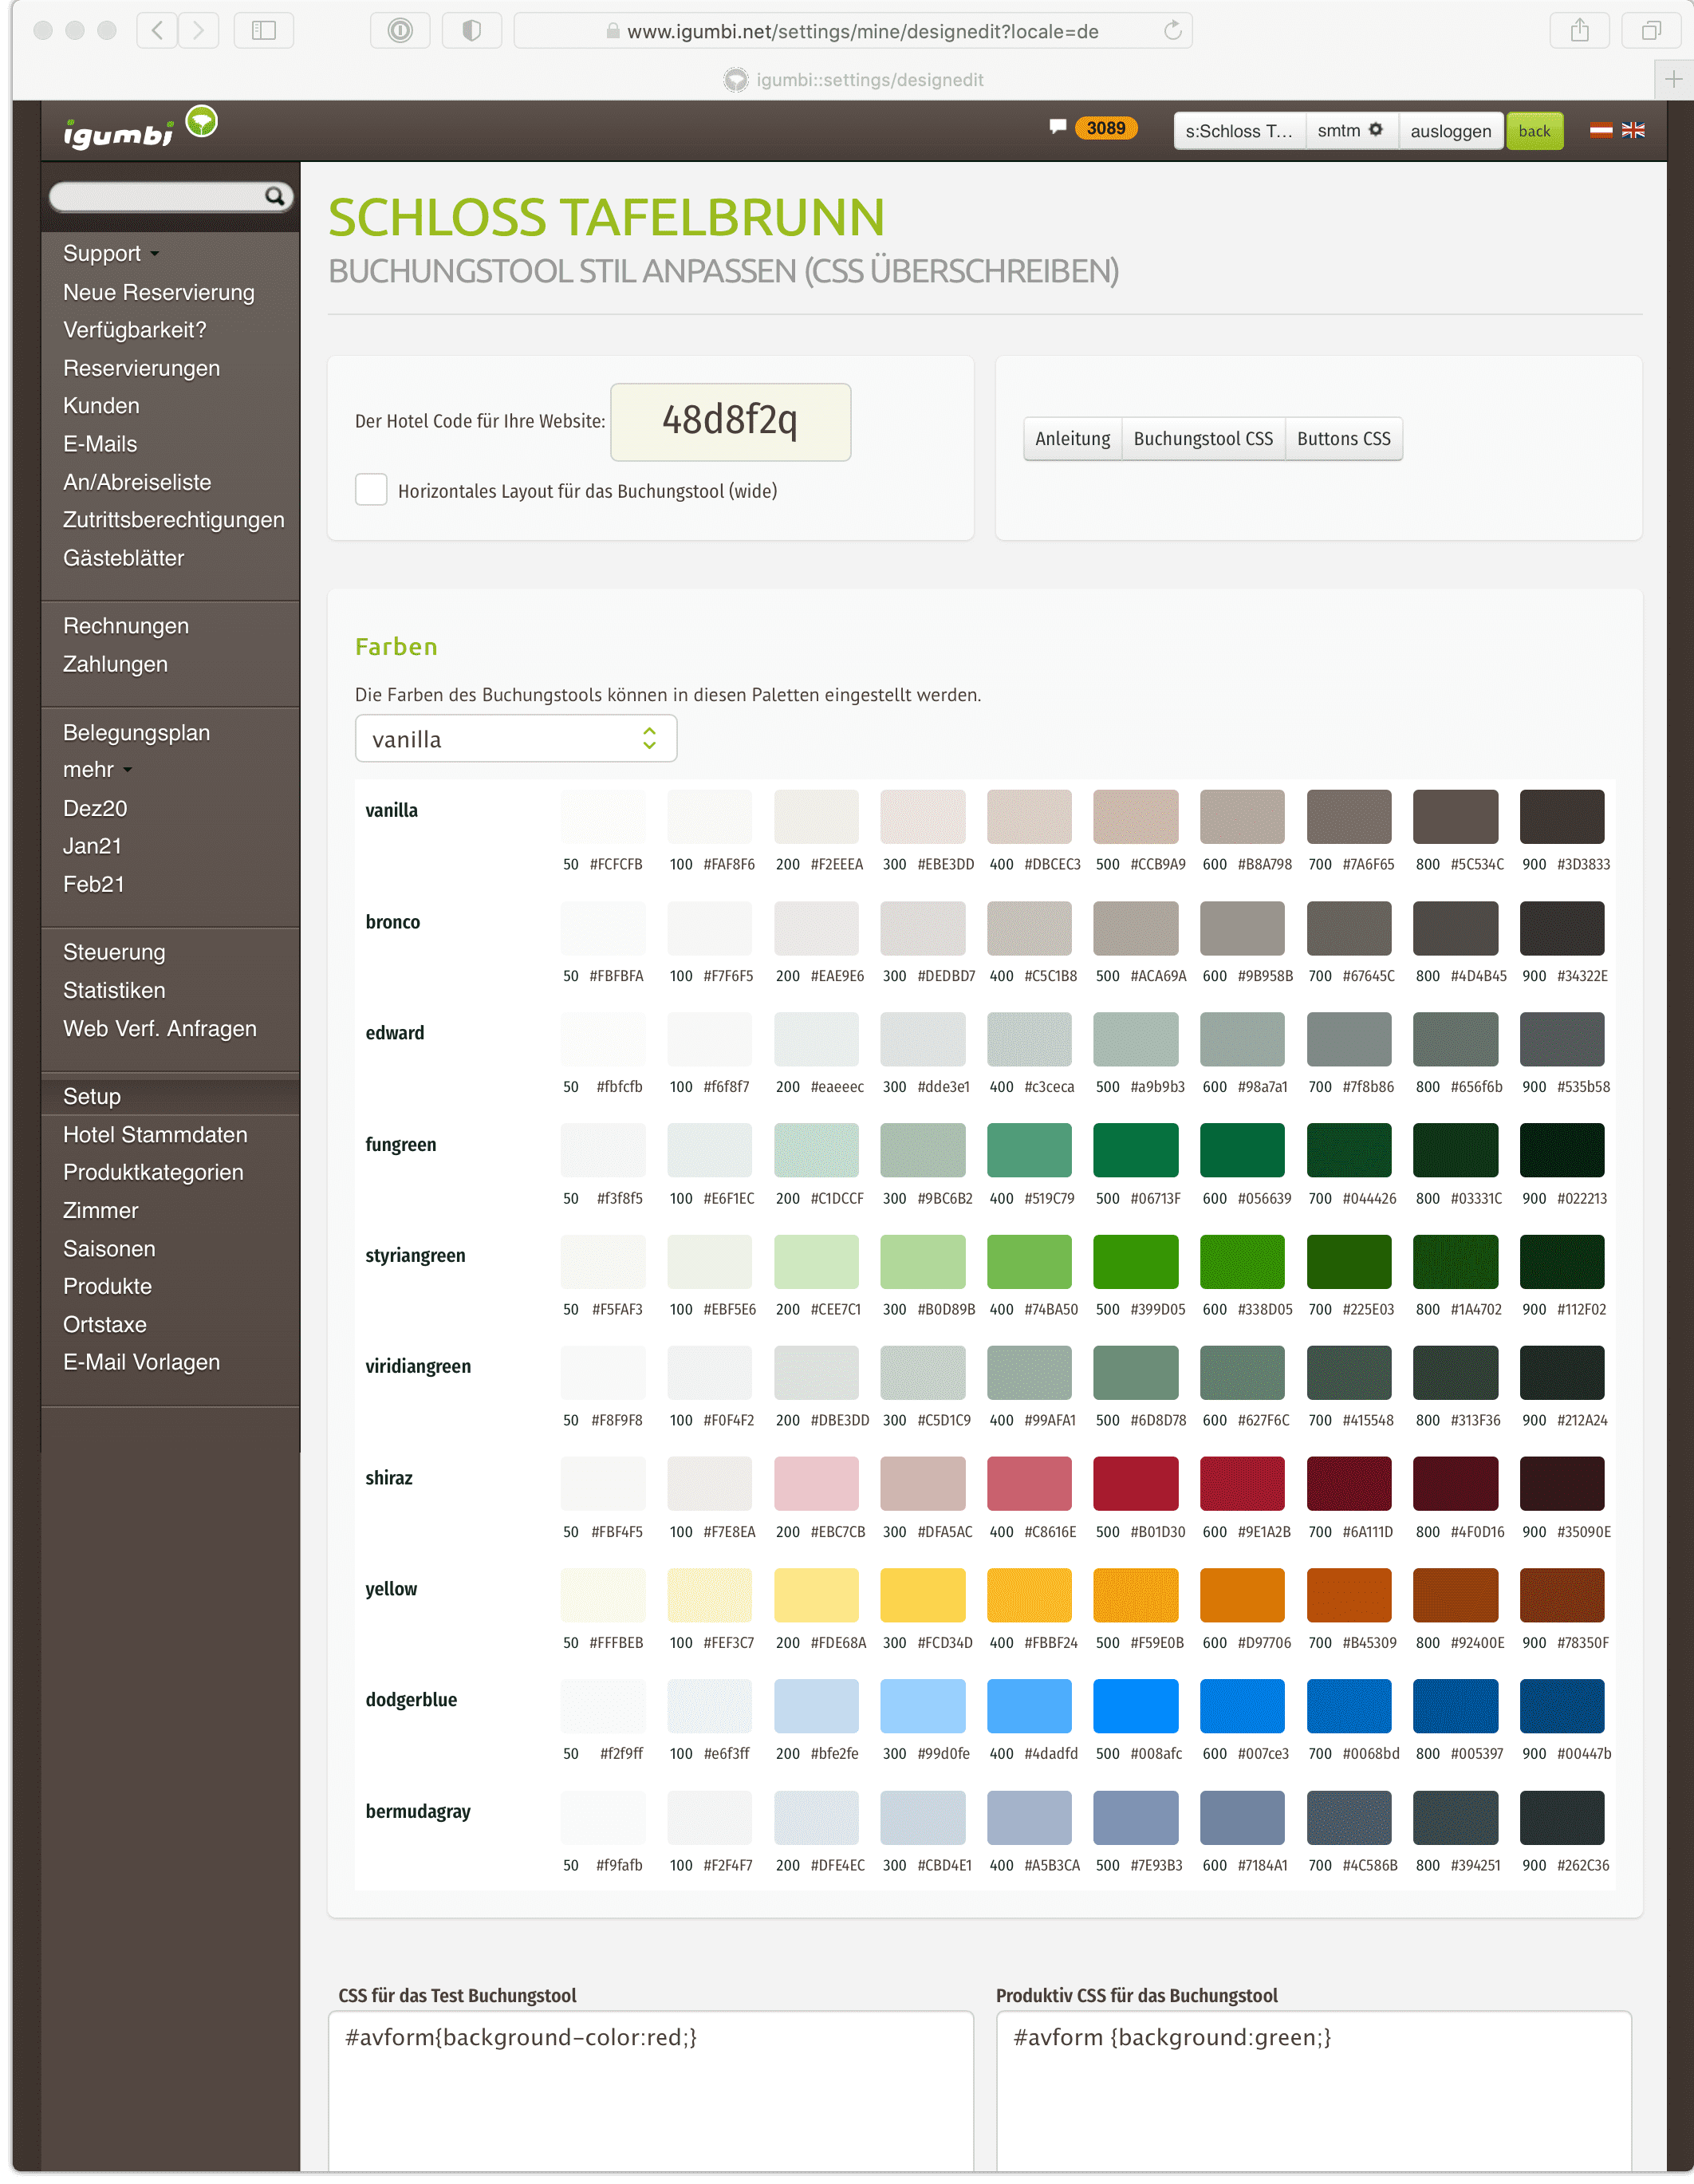 Get the hotel code and set the color scheme in the igumbi setting page